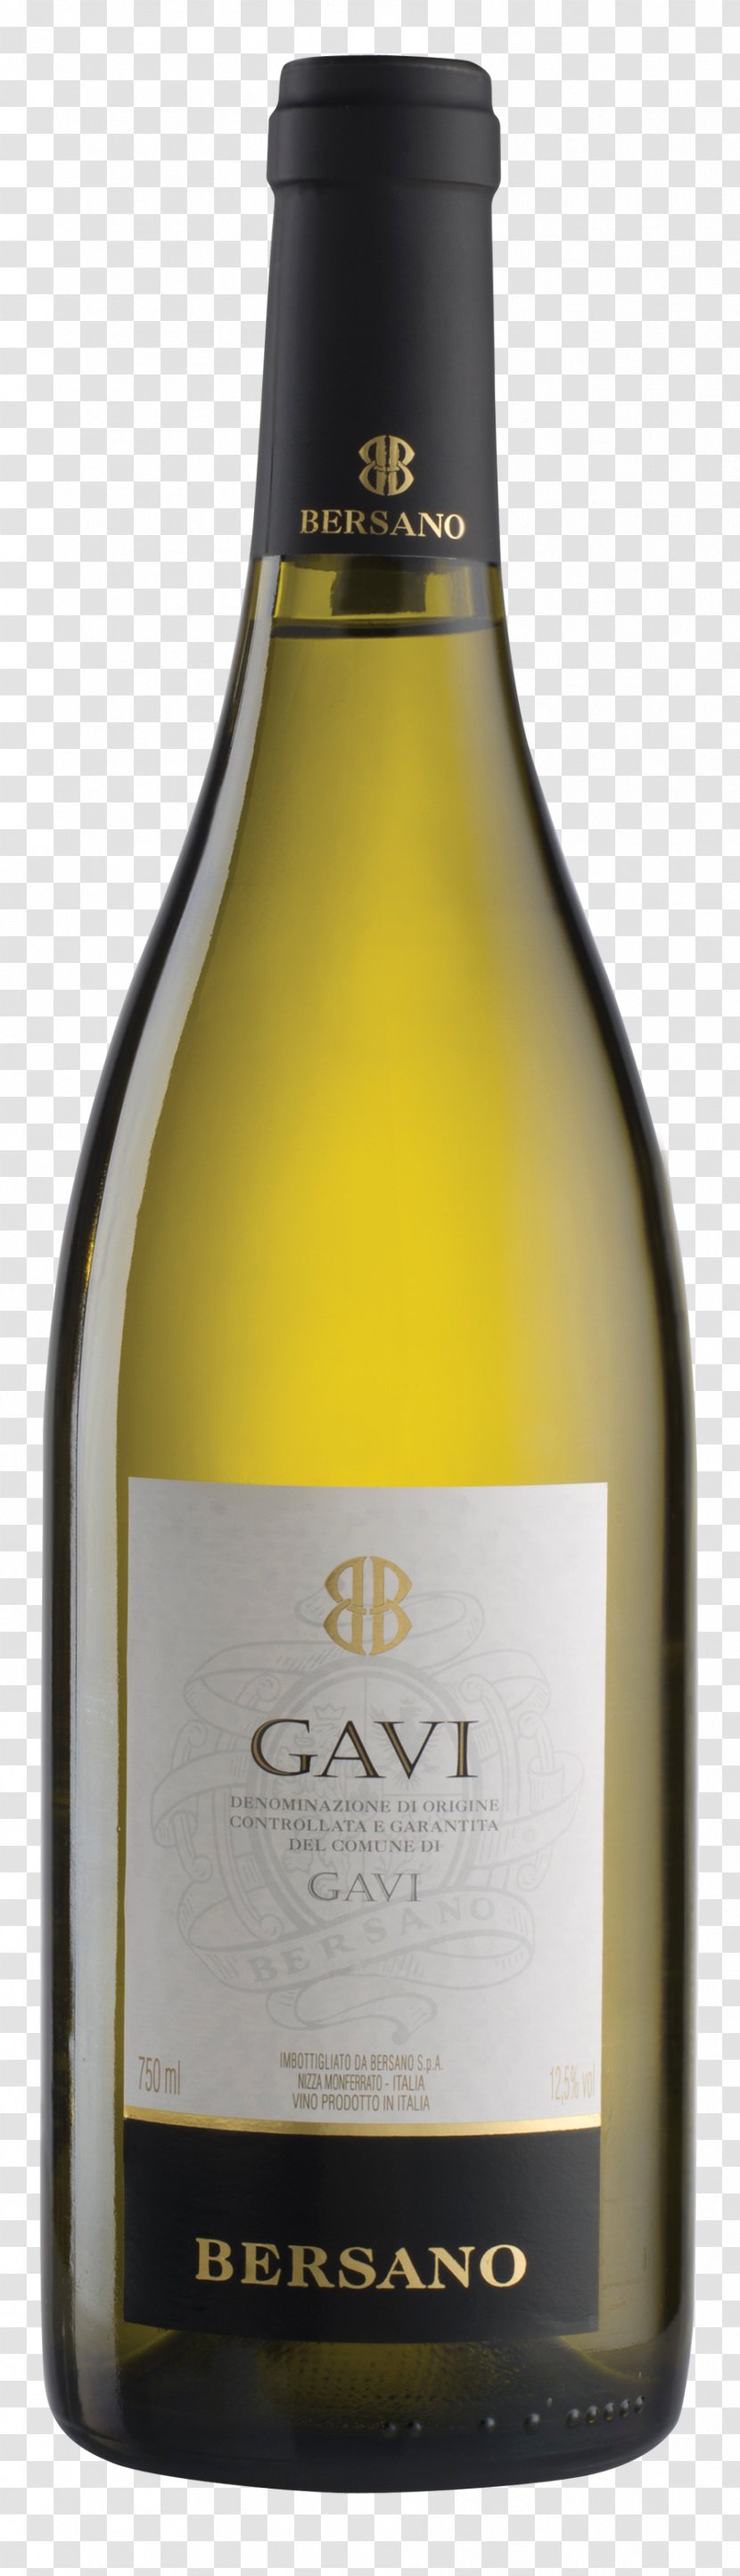 Champagne White Wine Chardonnay Pinot Gris - Glass Bottle Transparent PNG